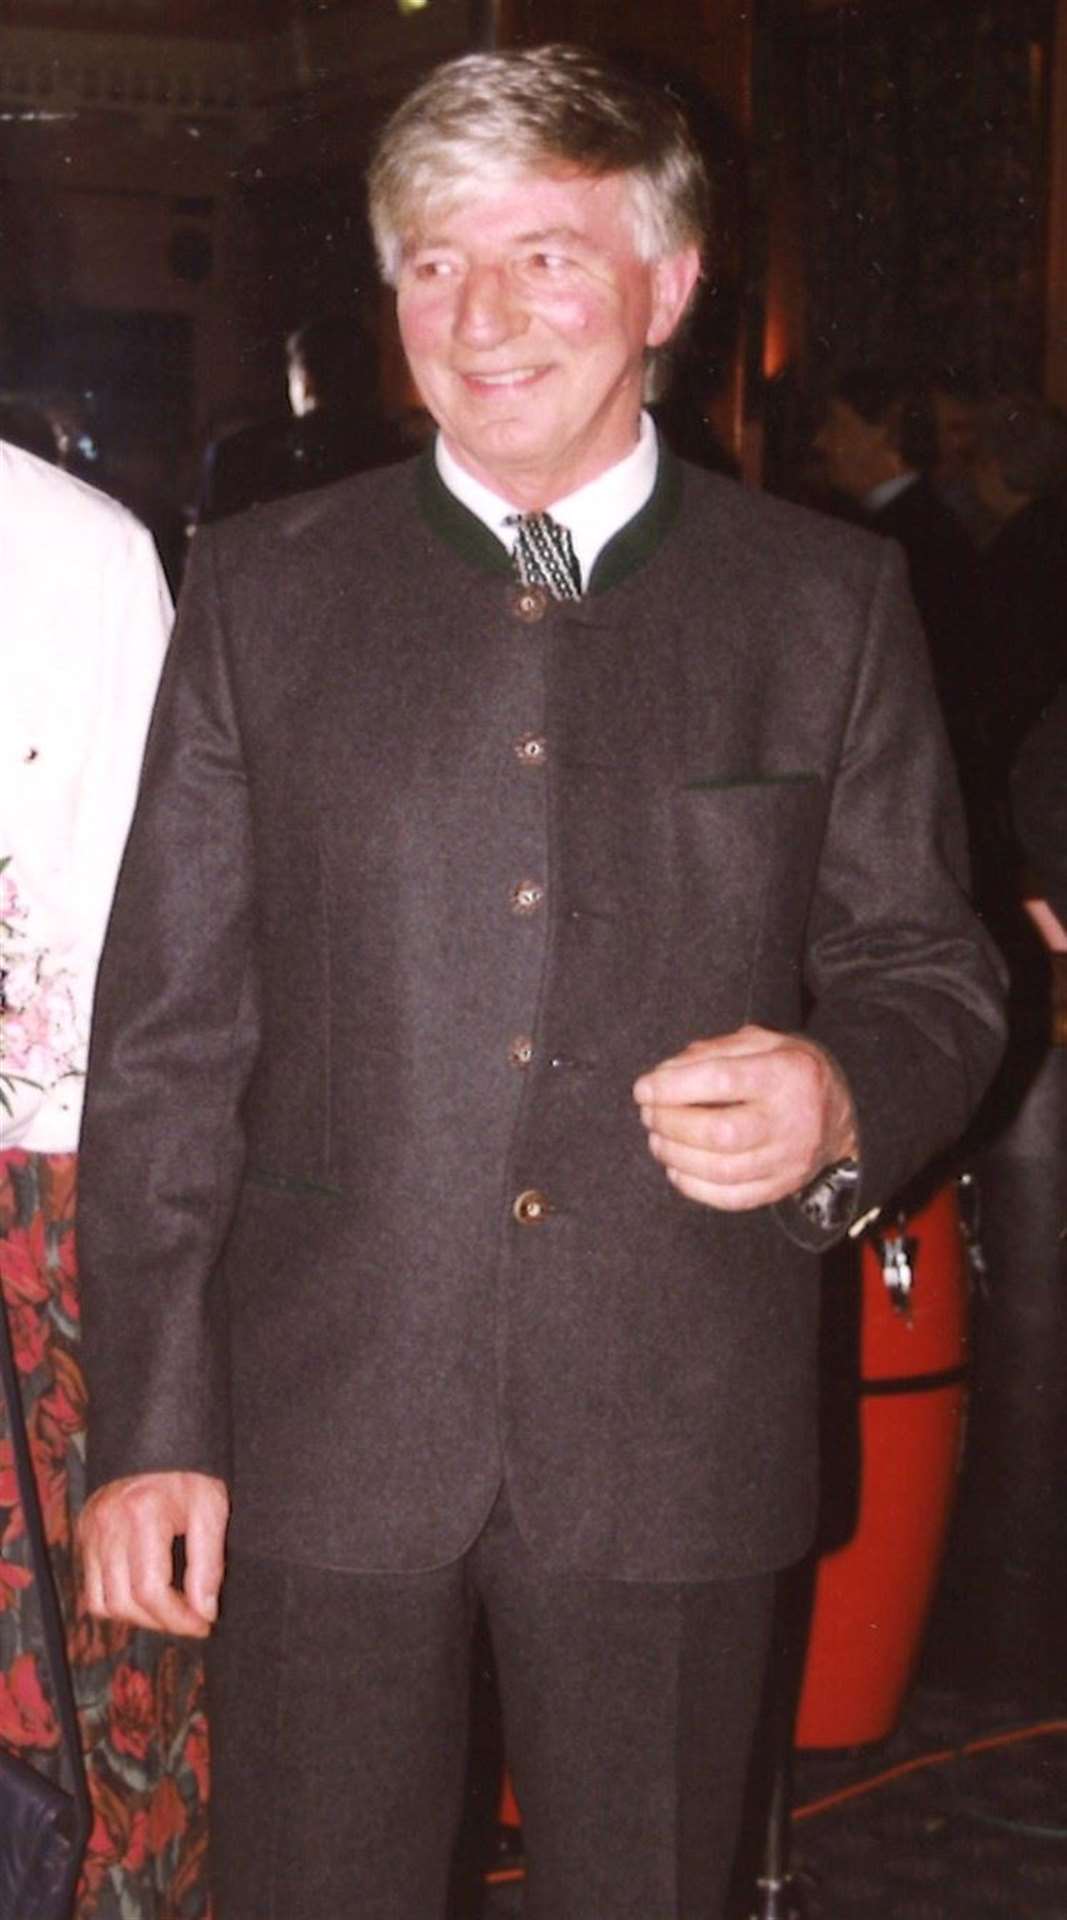 Hans Kuwall in his Austrian suit which he sported on big occasions.